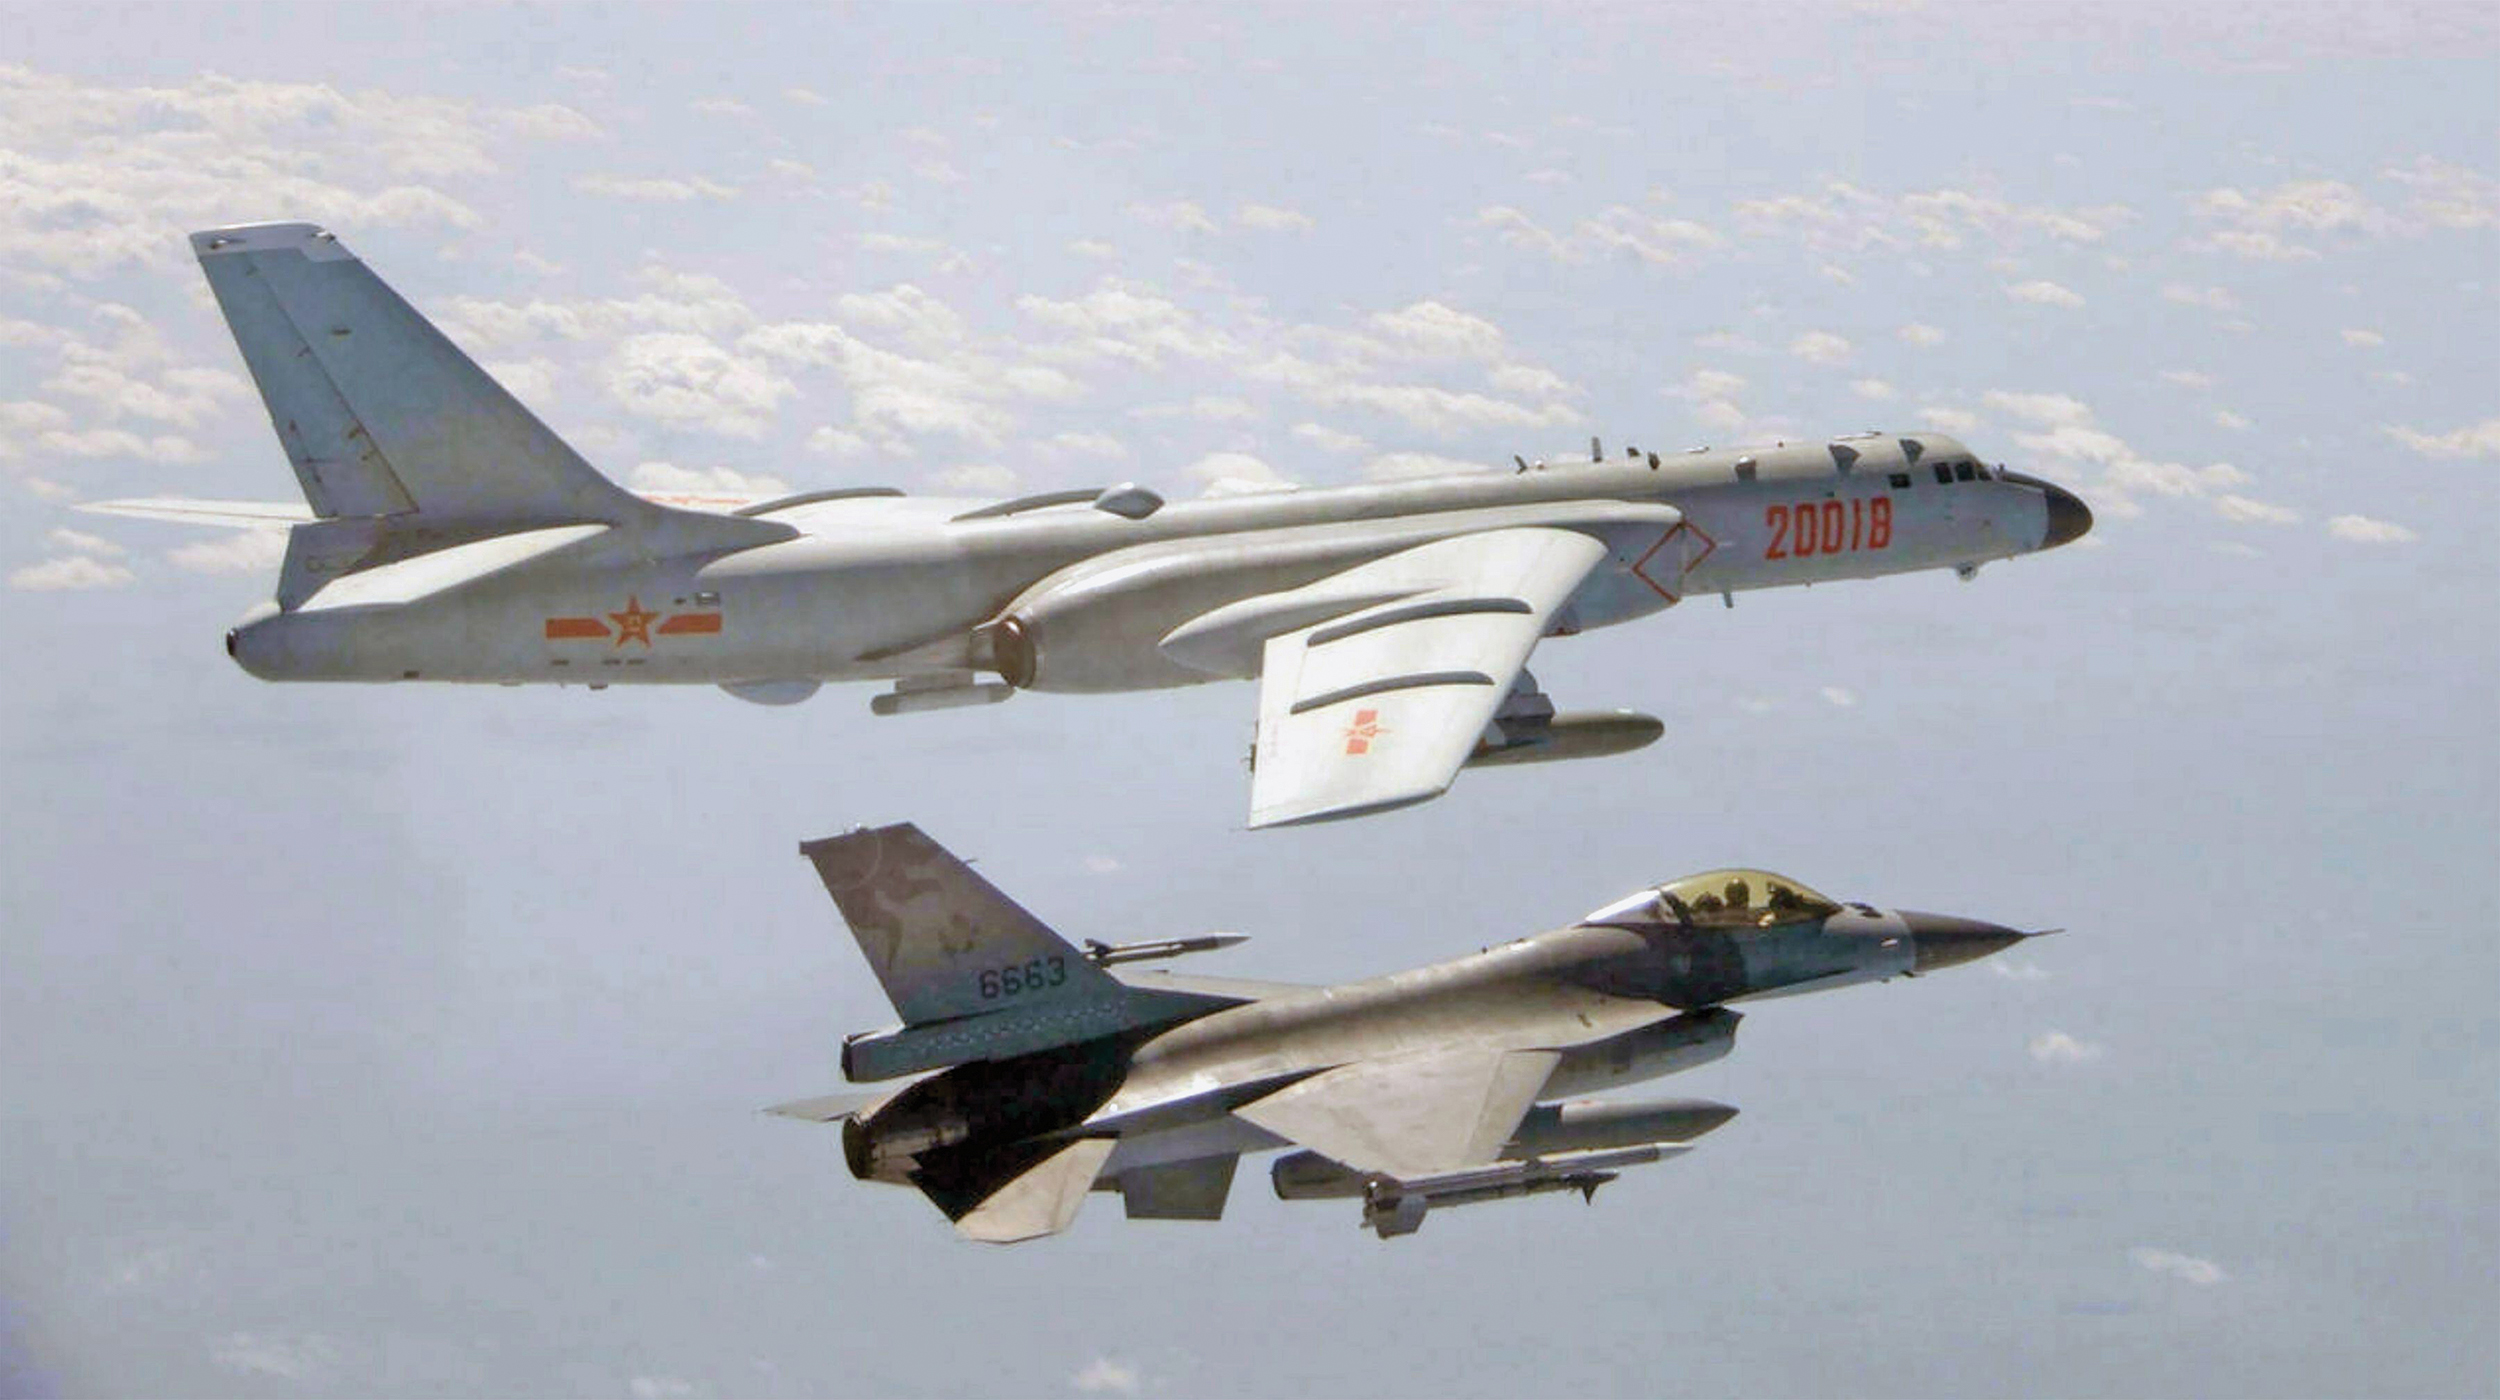 Taiwan Air Force F-16 monitors Chinese People’s Liberation Army Air Force H-6 bomber as it passes near Taiwan airspace